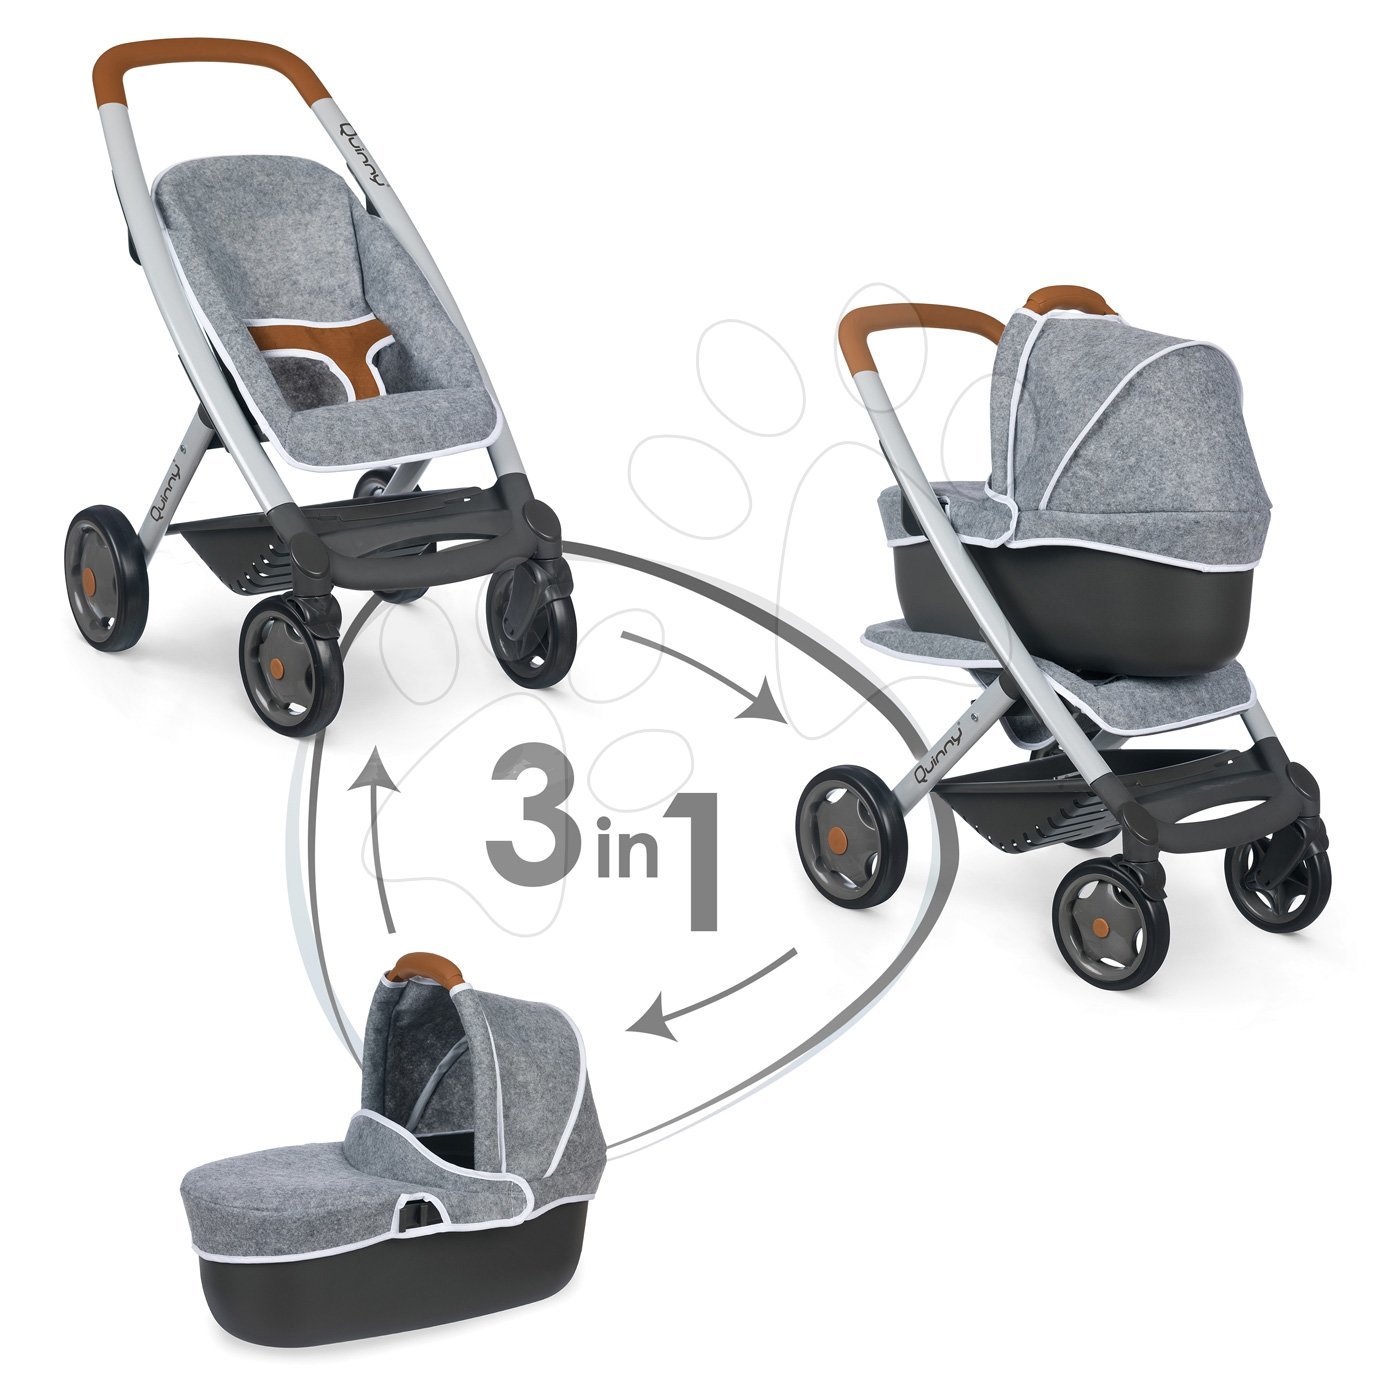 Doll prams from 18 months - DeLuxe Maxi Cosi & Quinny Grey Smoby Doll's Pram and Sport Pushchair 3in1, with carrier for doll, gray